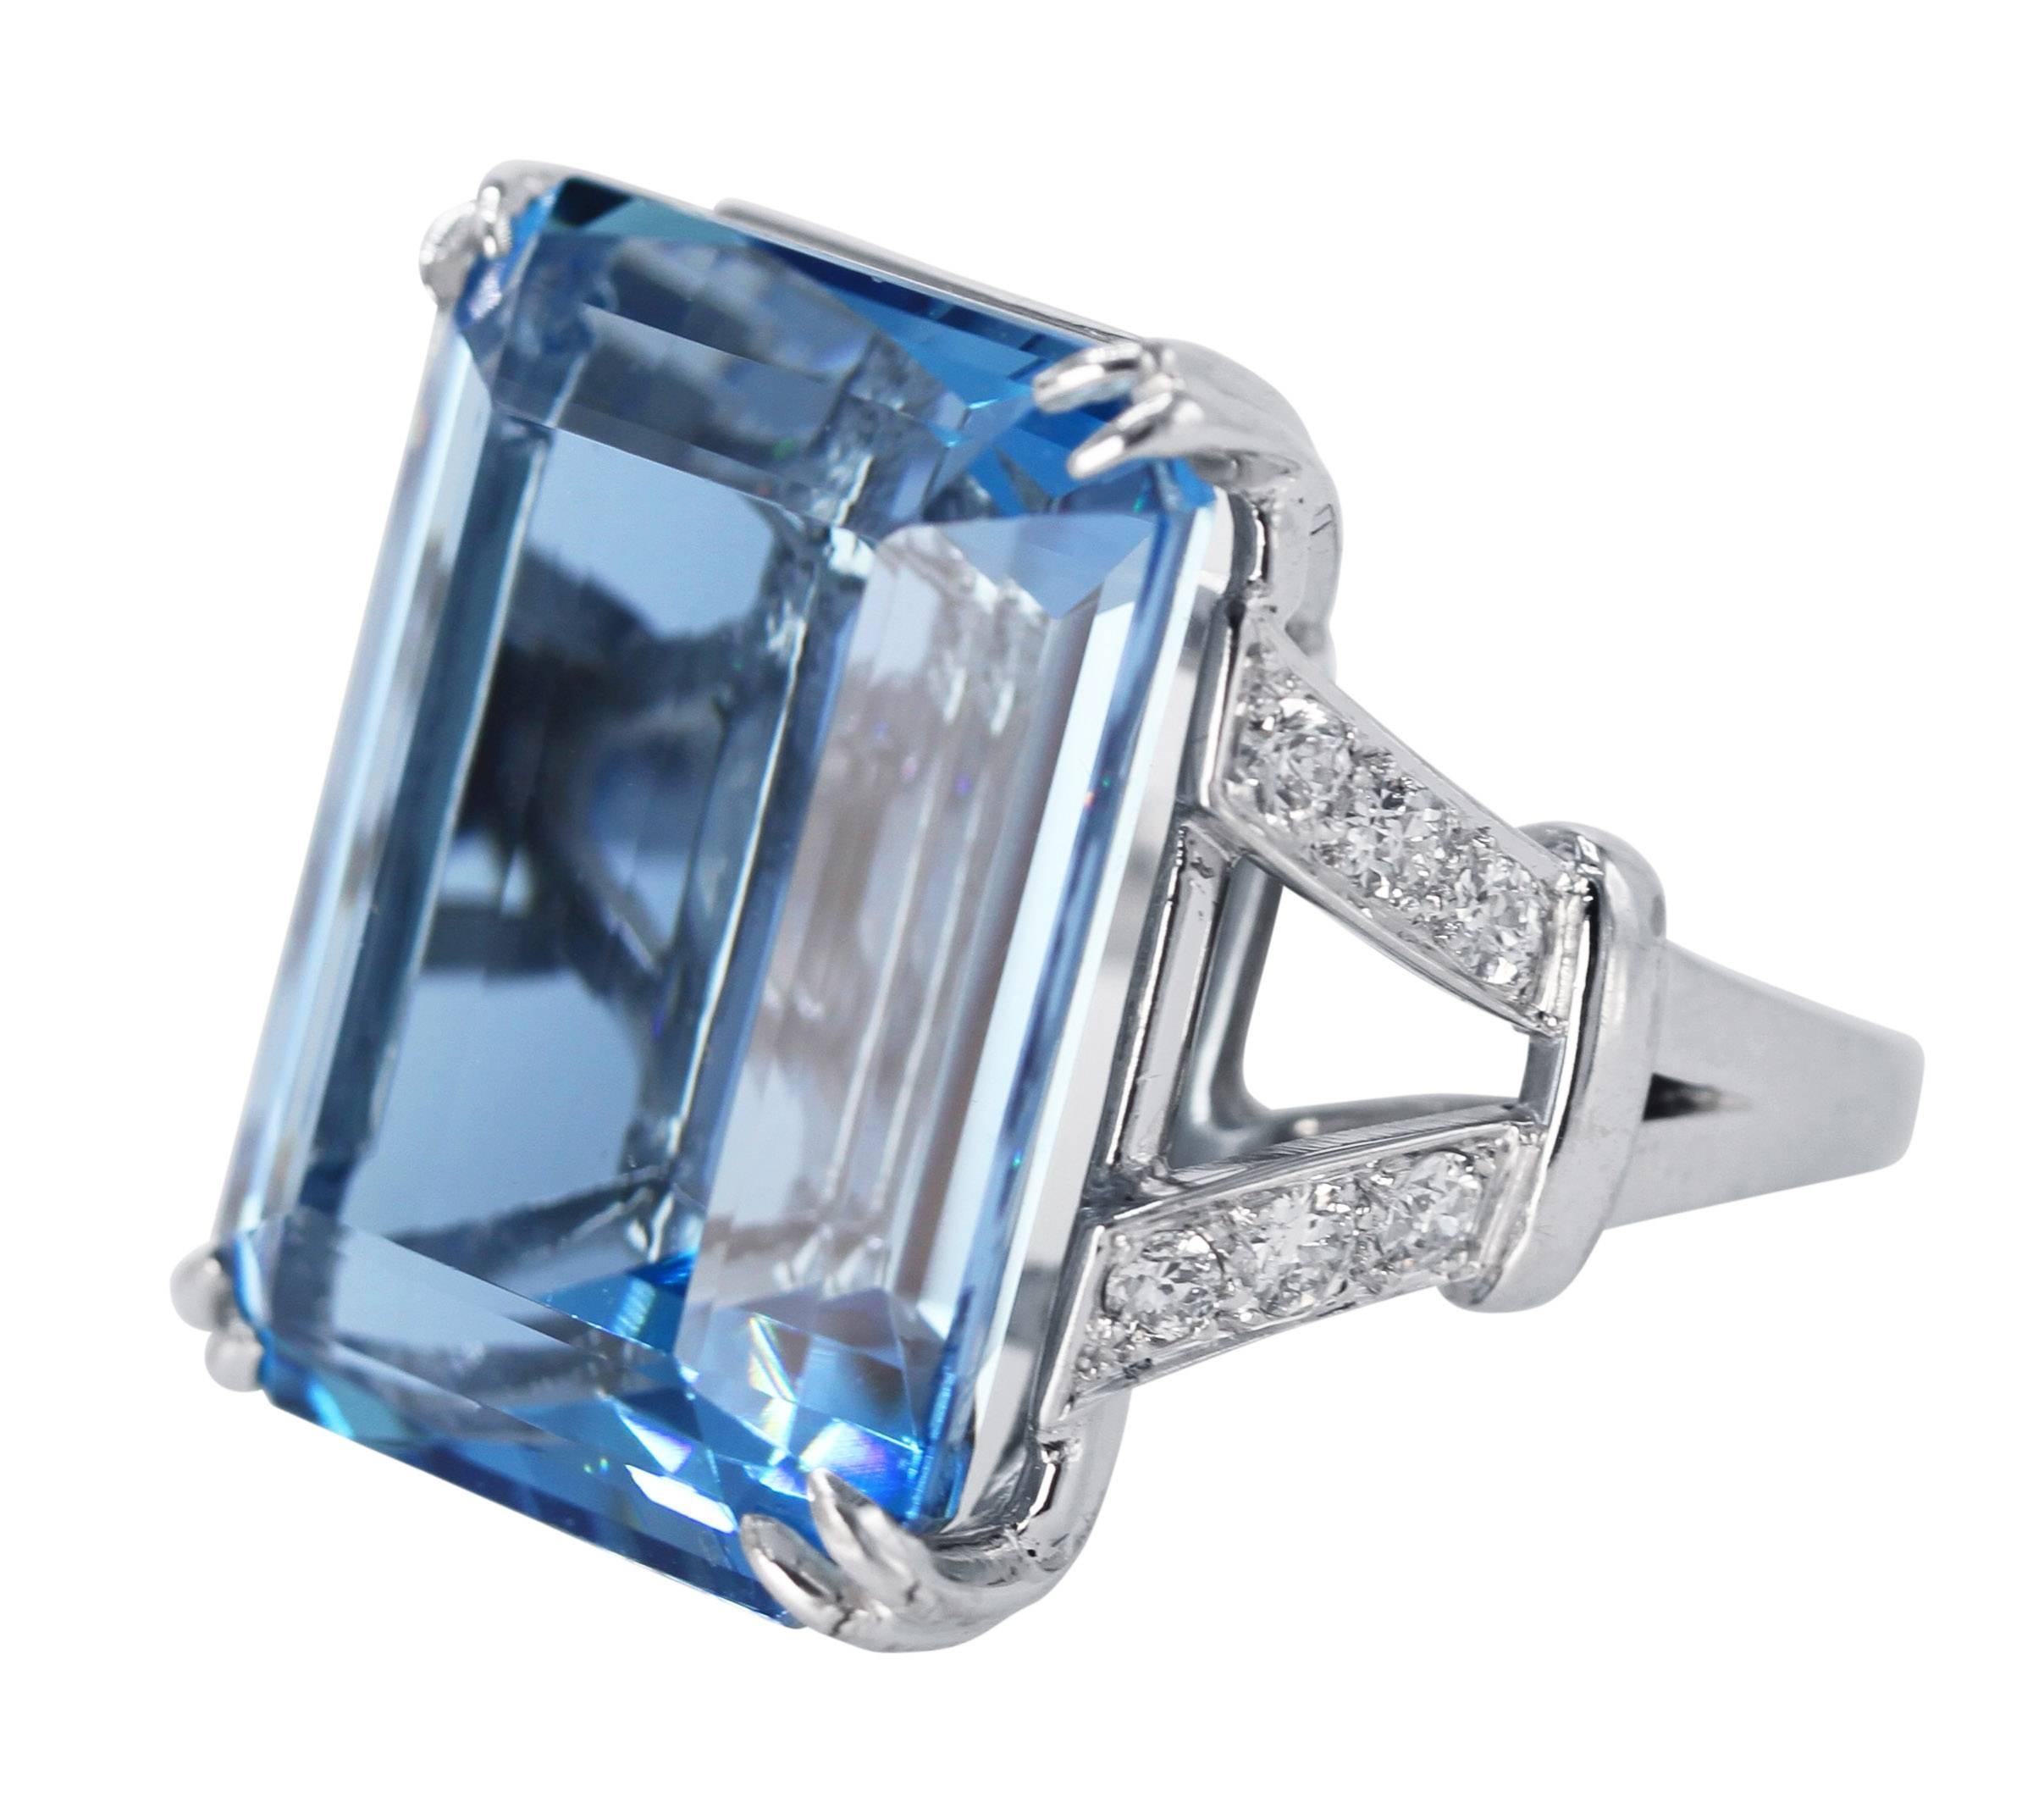 18 Karat White Gold, Aquamarine and Diamond Ring
• Step-cut aquamarine weighing 43.08 carats
• 12 round diamonds approximately 0.75 carat
• measuring 1 by 3/4 inch, gross weight 20.8 grams, size 7